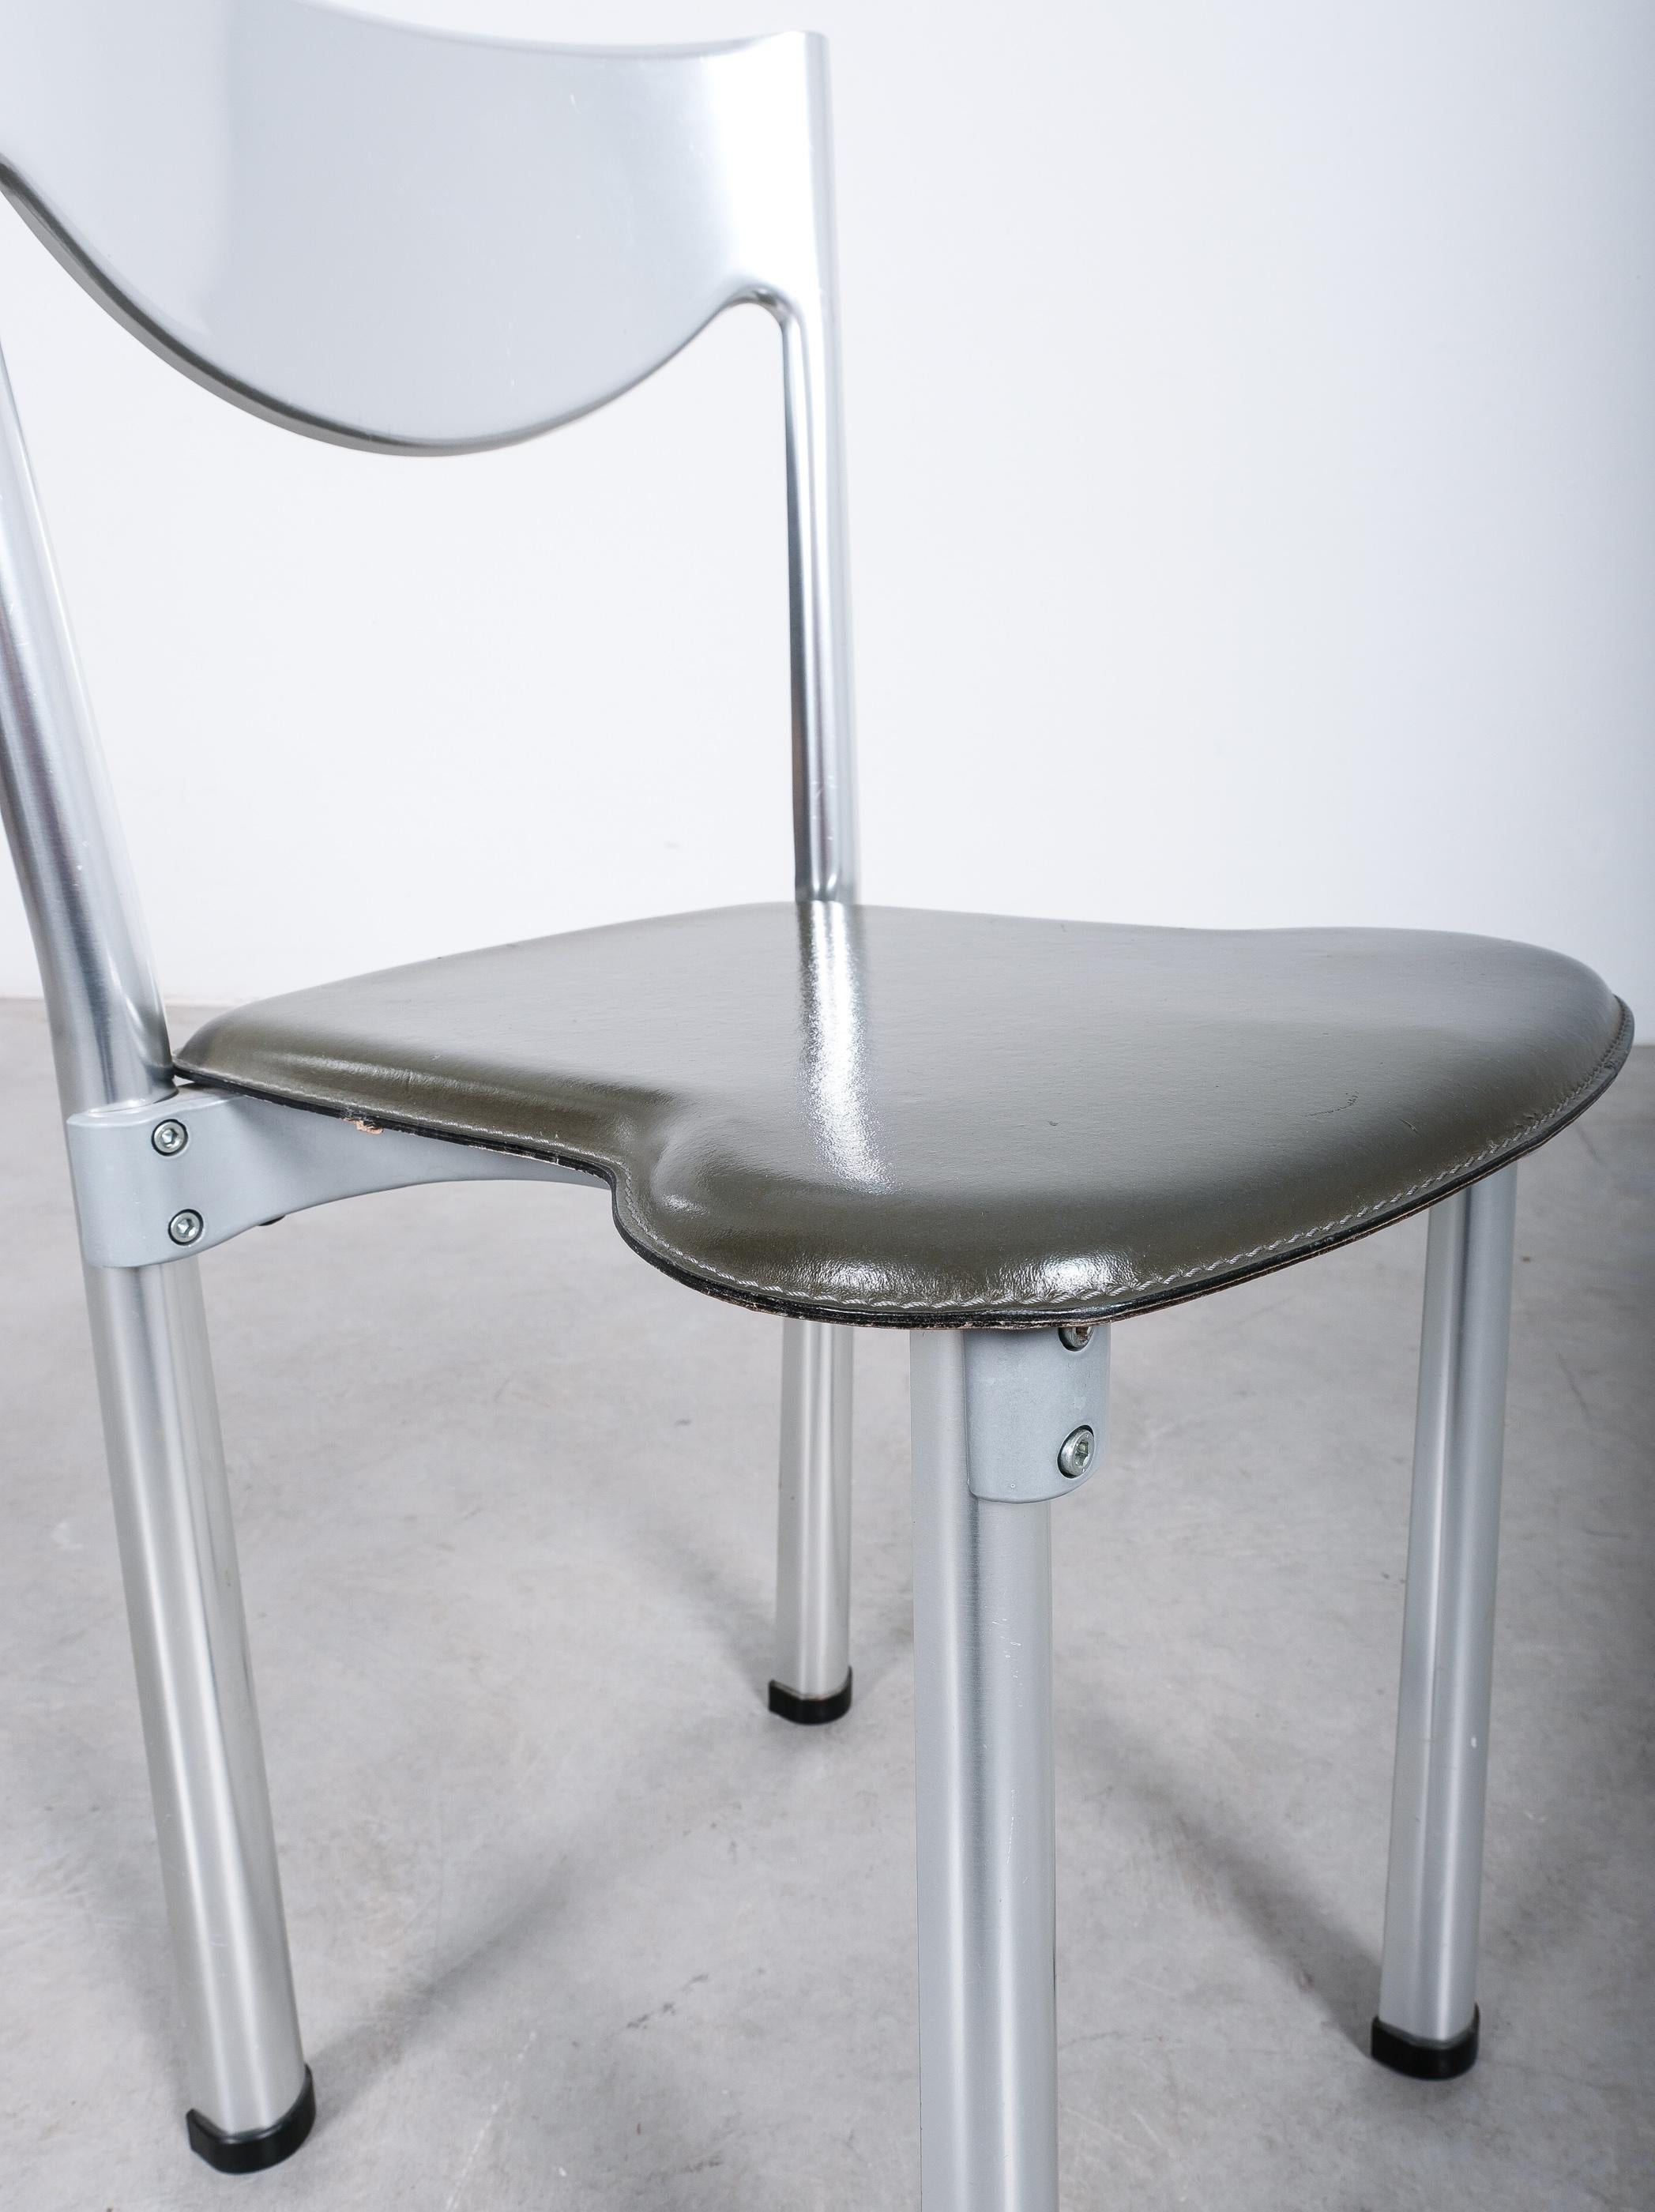 Metal Antonello Mosca for Ycami Aluminum Leather Chairs, Italy, 1980 For Sale